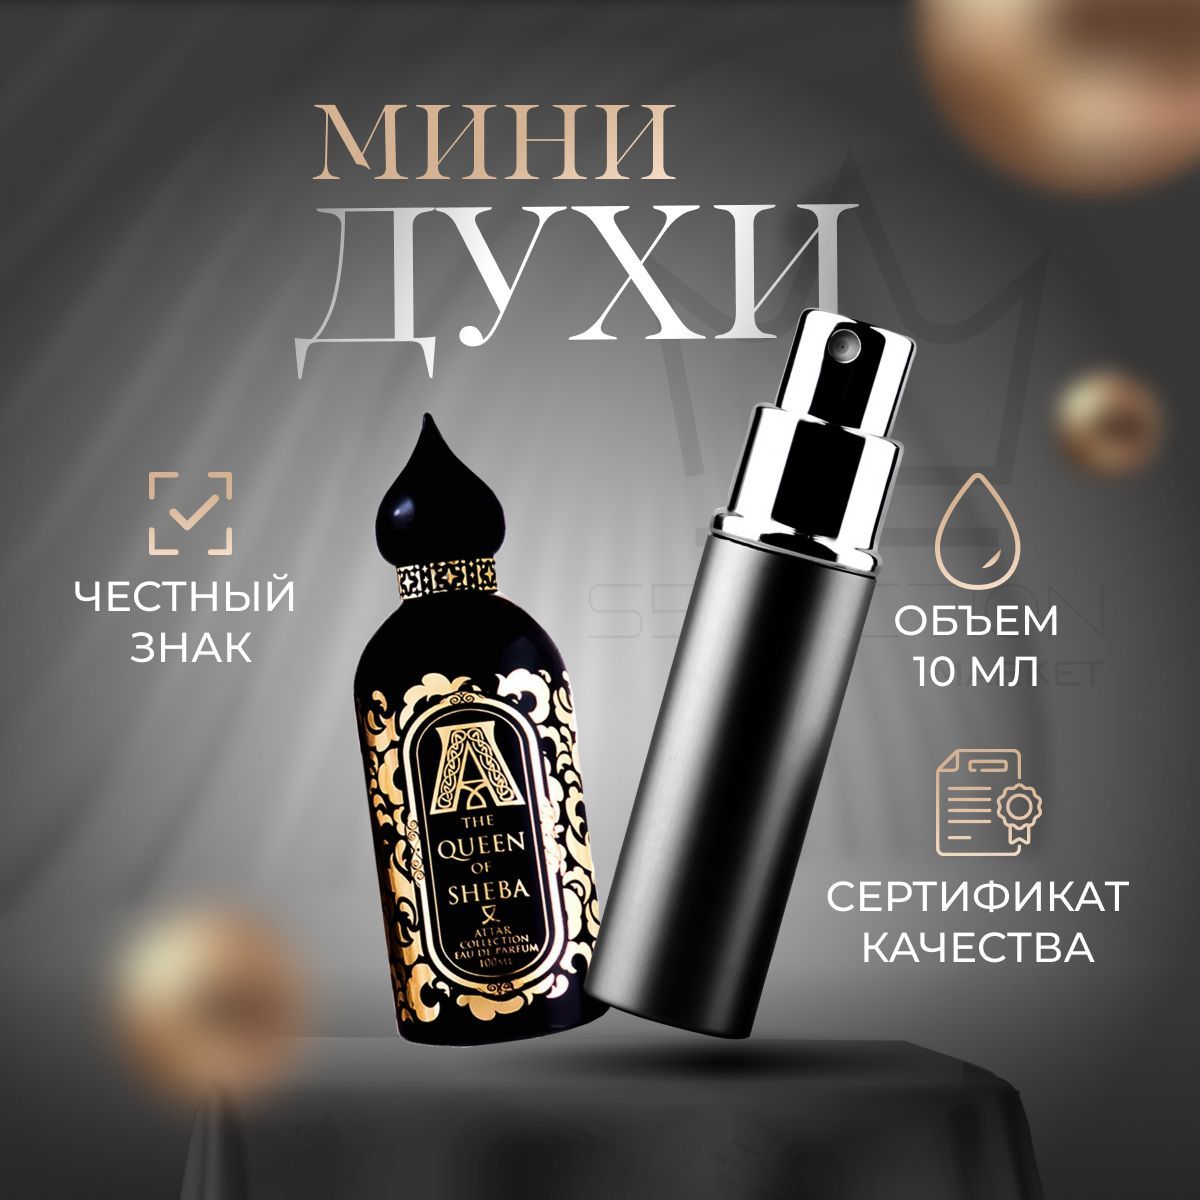 Attar collection the queens throne. Attar collection the Queen of Sheba. Парфюмерная вода Attar collection the Queen of Sheba. Аттар коллекшн Королева Шеба. Attar collection the Queen of Sheba парфюмированная вода 100мл -.